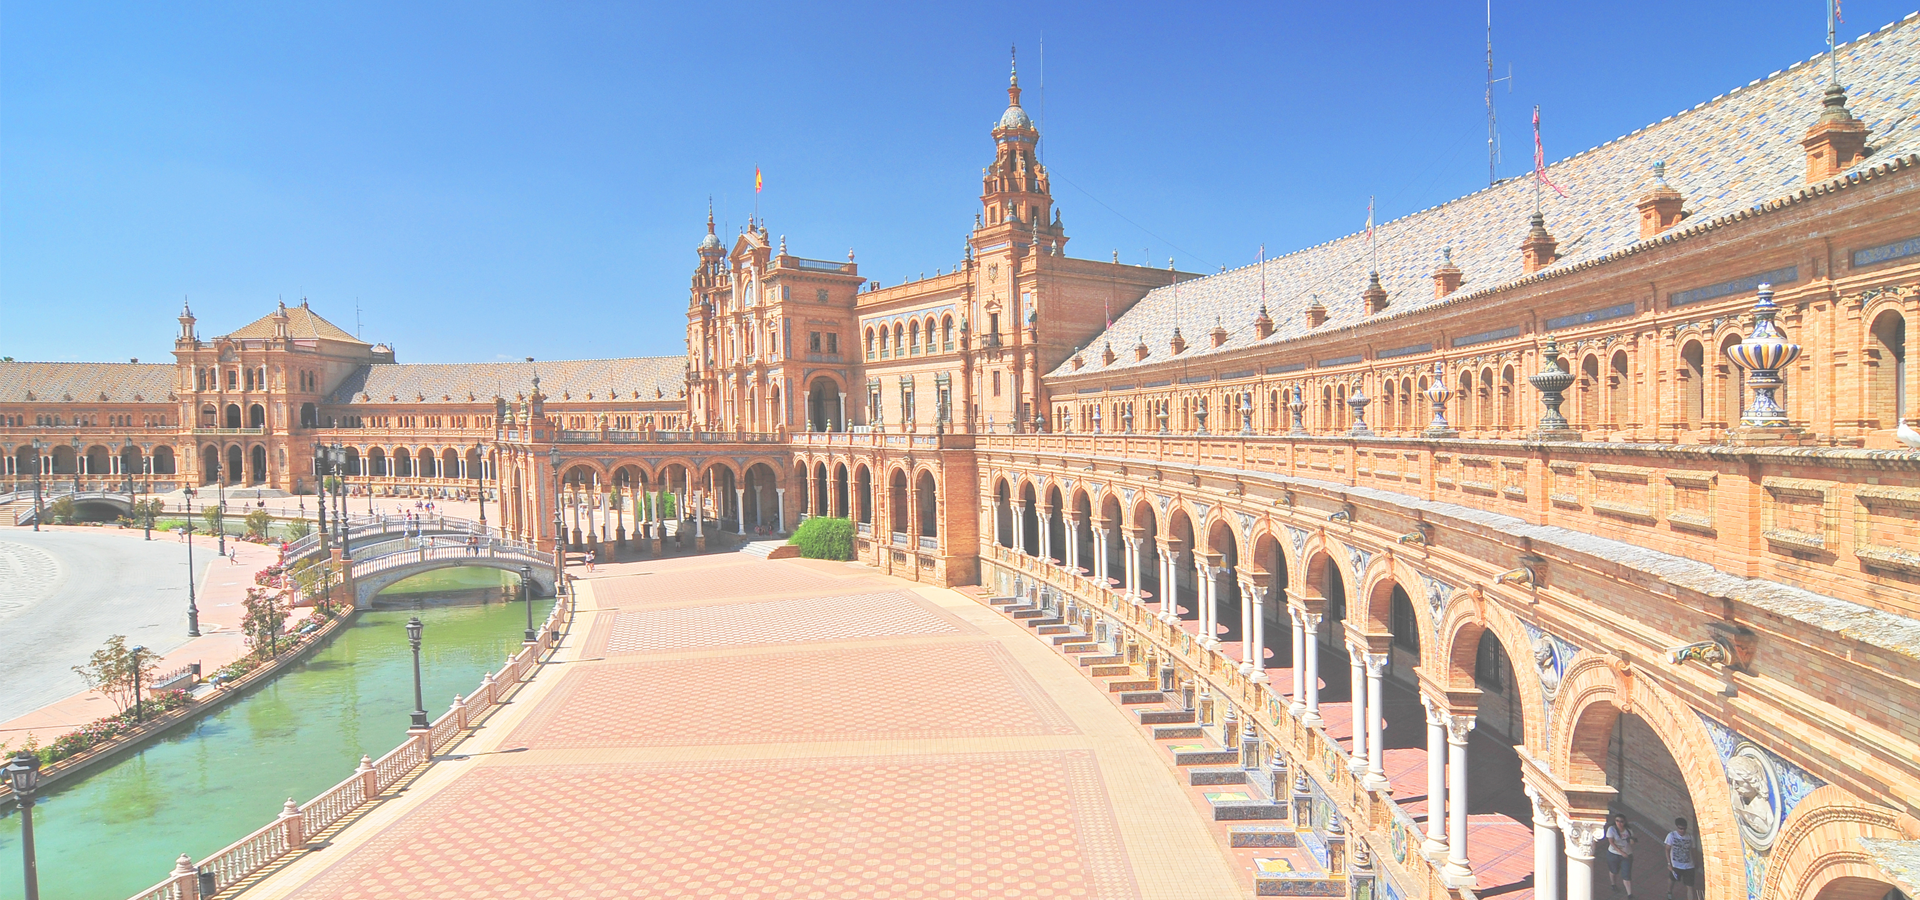 <b>Seville, Andalusia, Spain</b>